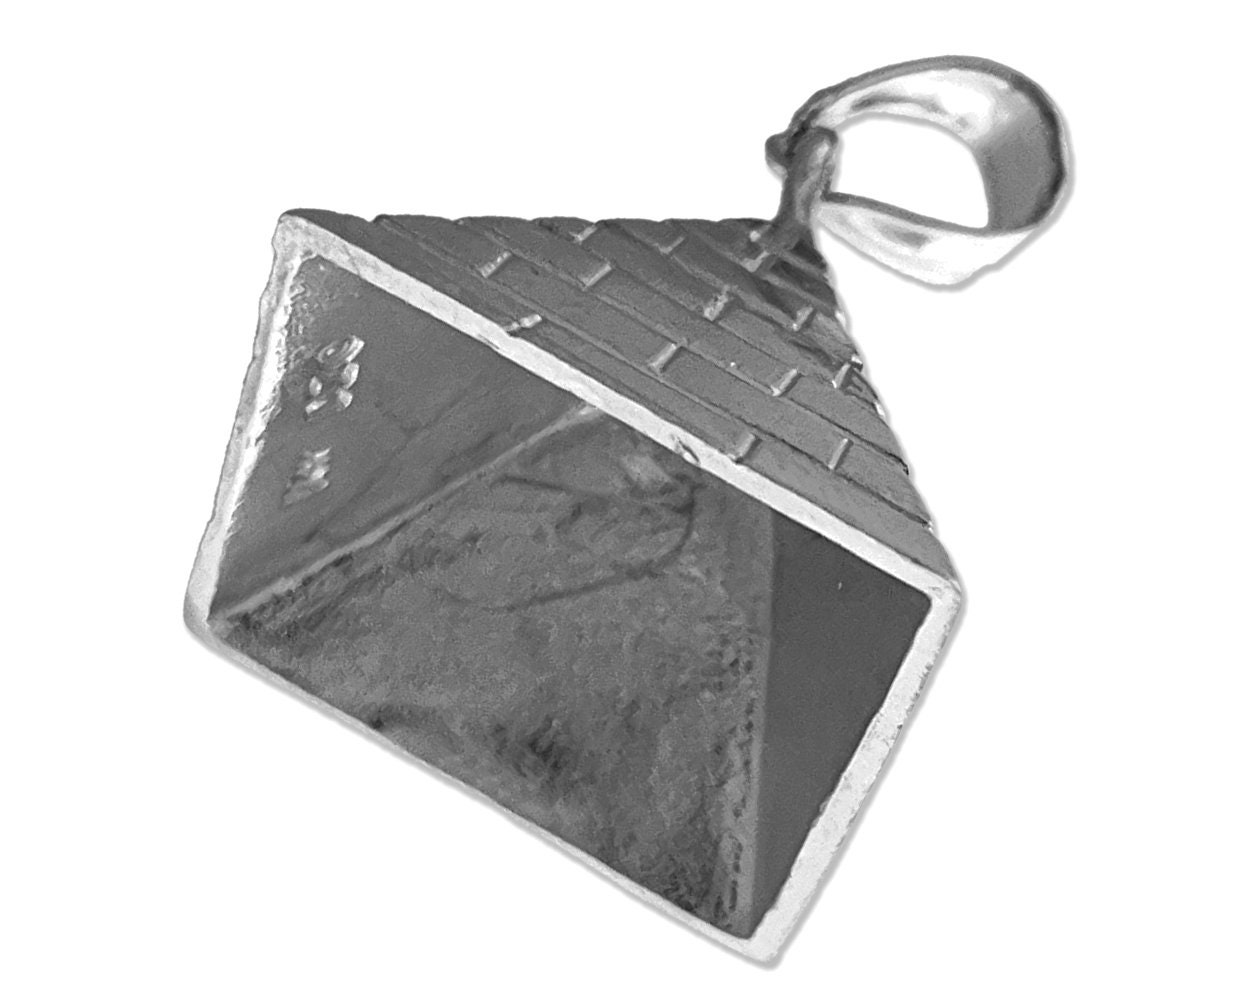 Details about   Rhodium Plated 925 Sterling Silver 30MM Egyptian Pyramid Charm Pendant 